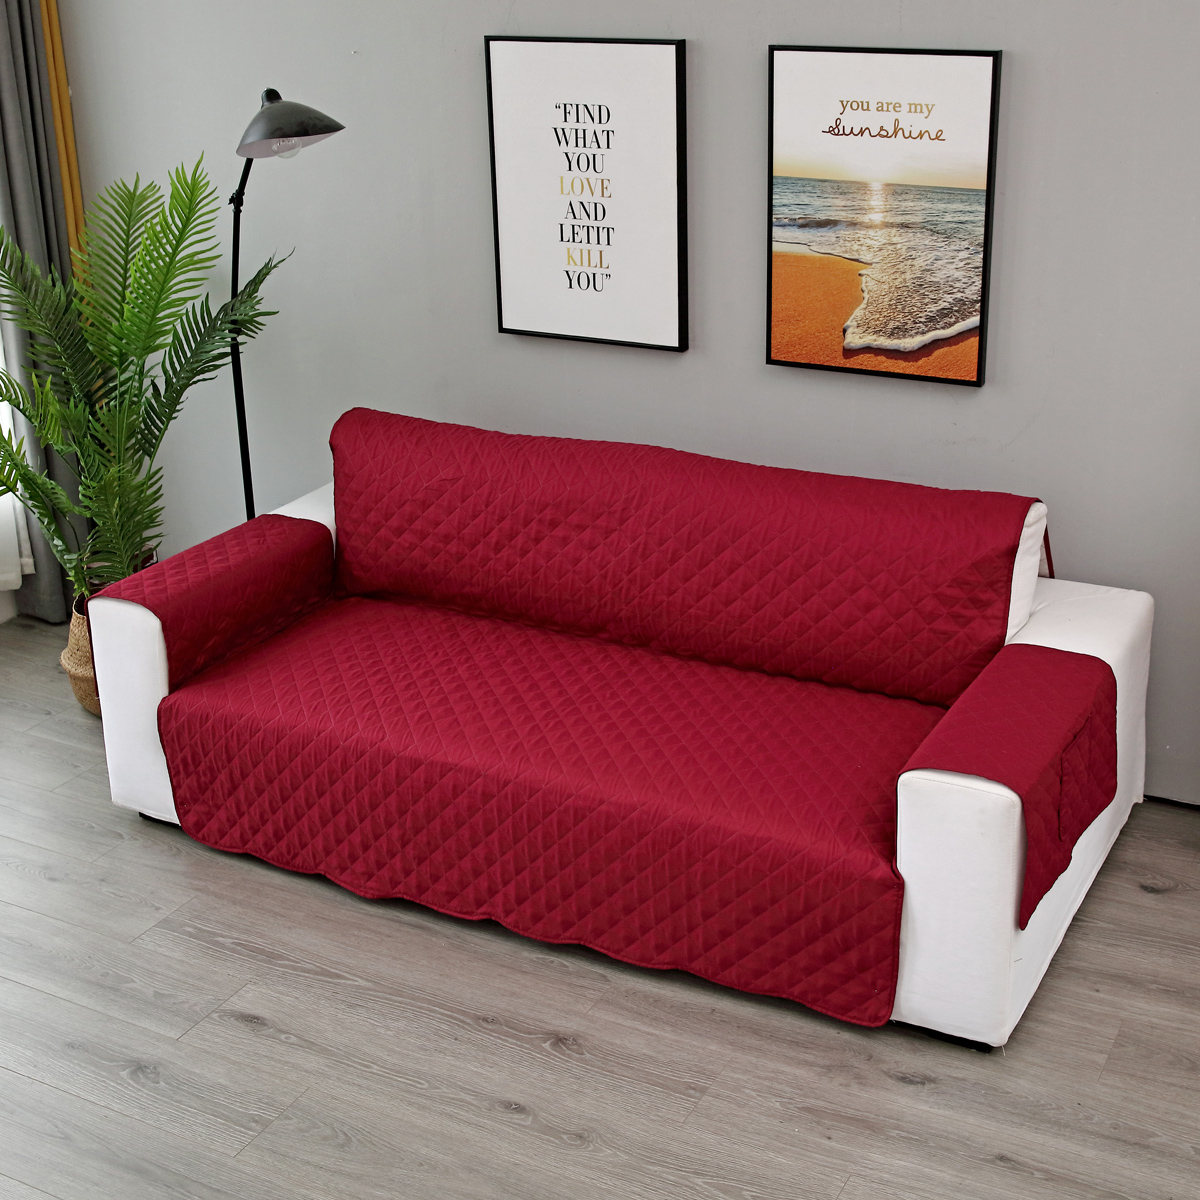 Double-Seats-Sofa-Cover-Living-Room-Home-Decoration-Polyester-Dust-proof-Seat-Covers-1631354-3